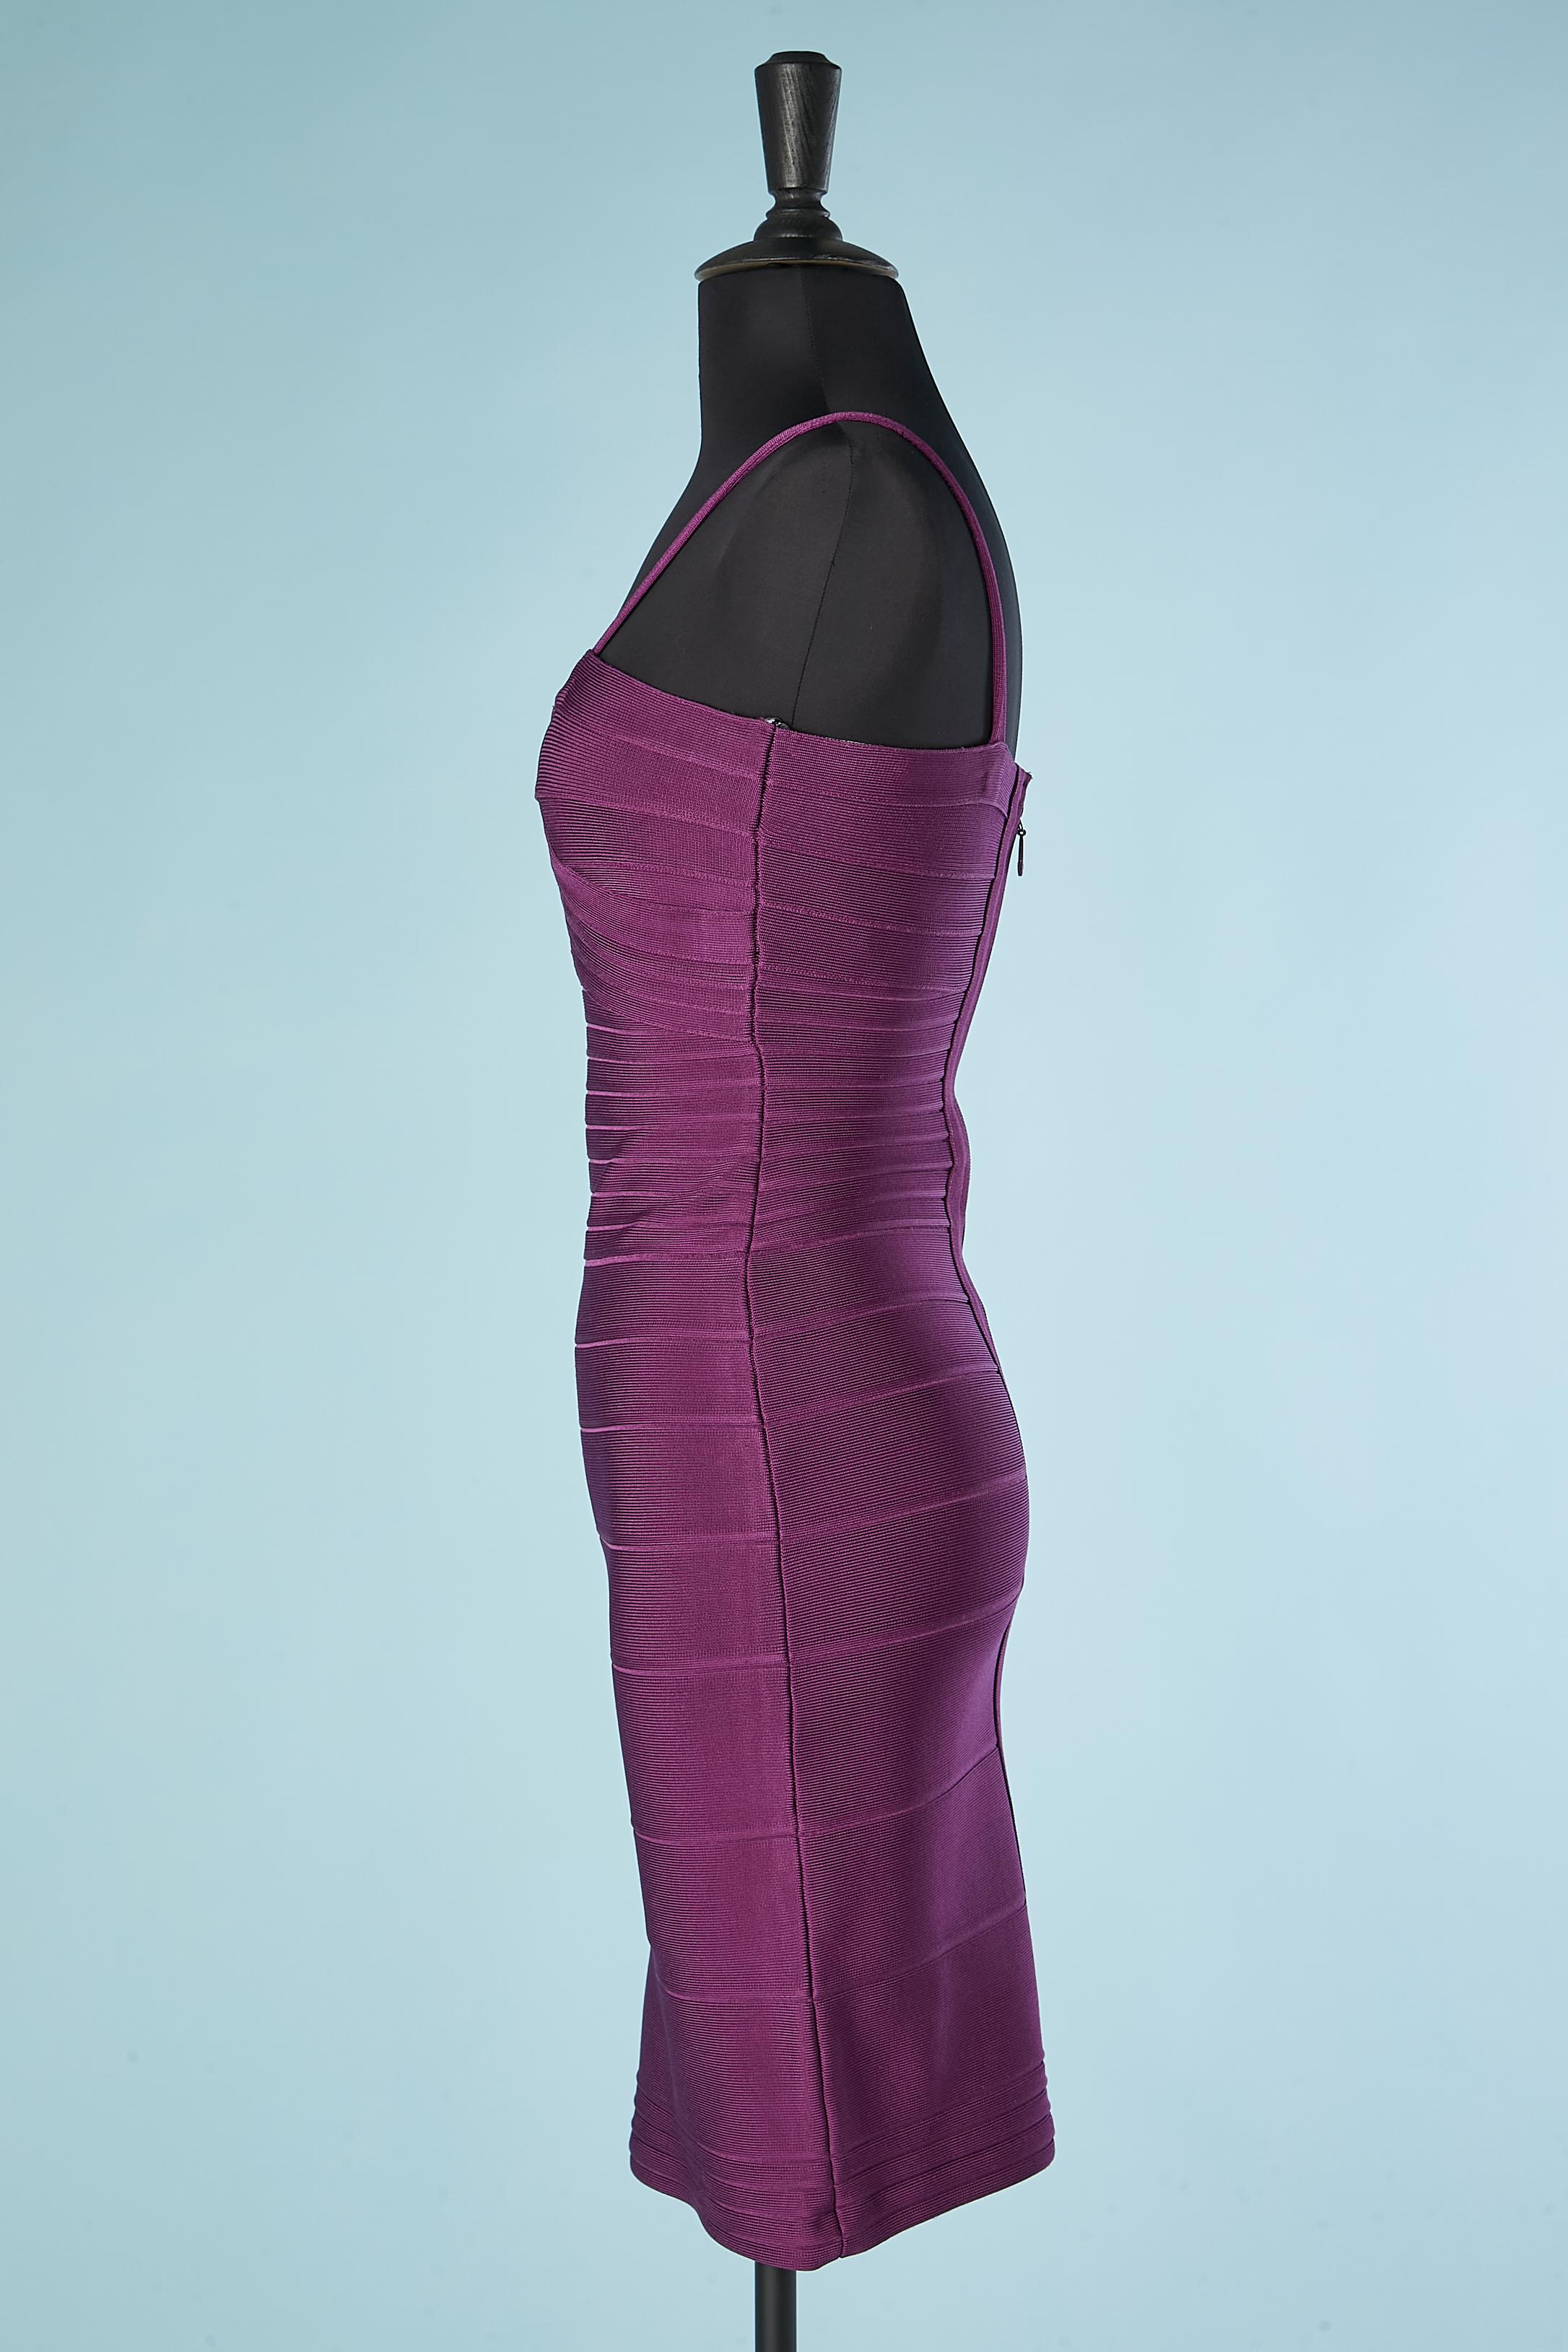 Purple rayon cocktail dress. Silicone on the inside edge of the bustier. Zip middle back. Fabric composition: 90% rayon, 9% nylon, 1% spandex. 
SIZE XS  